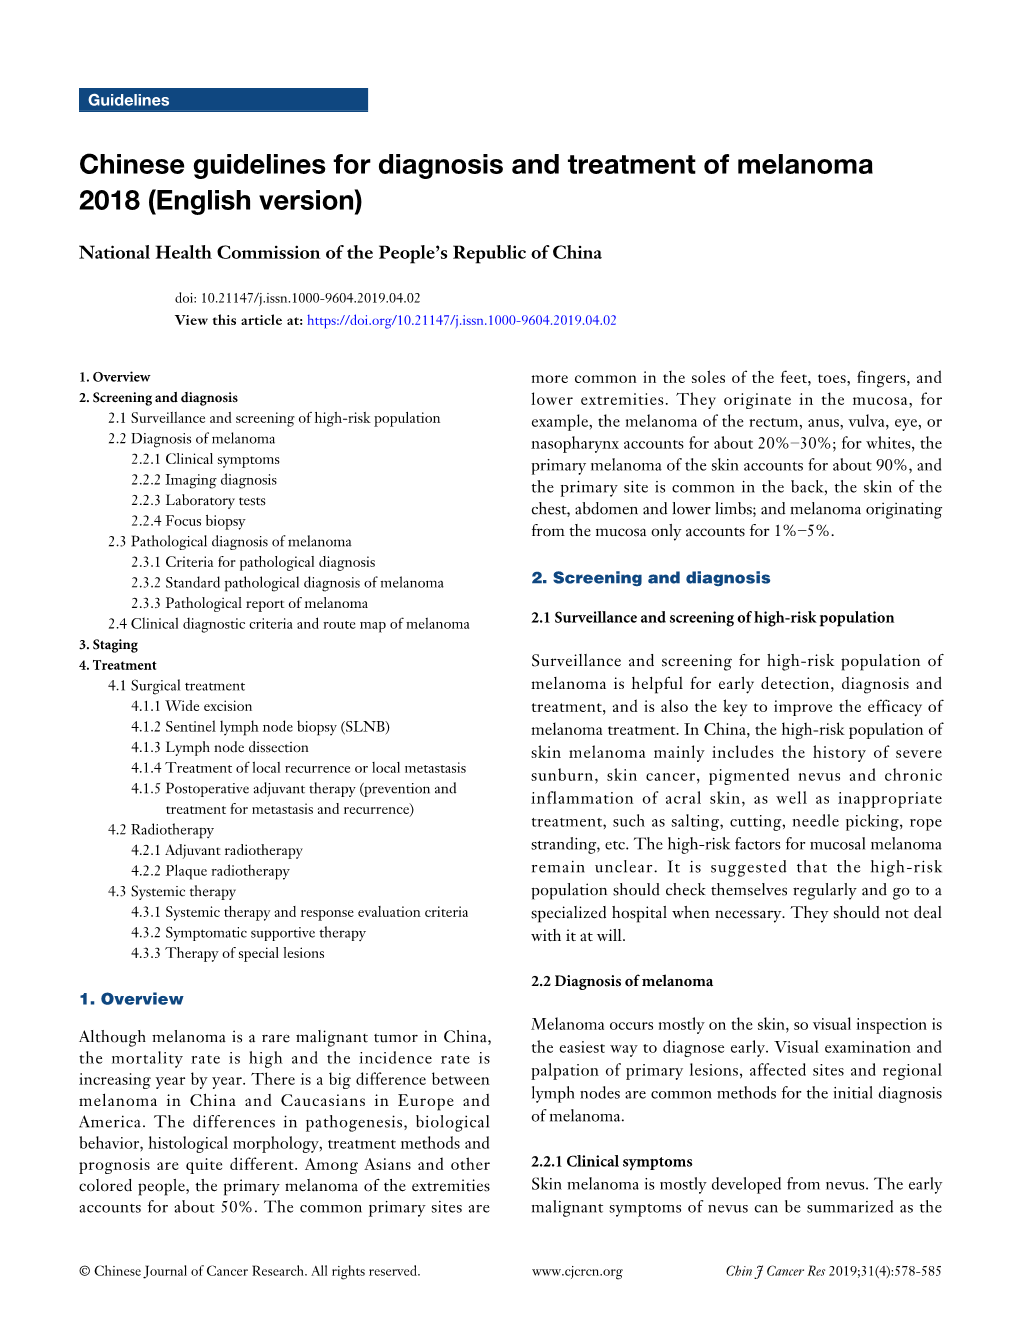 Chinese Guidelines for Diagnosis and Treatment of Melanoma 2018 (English Version)